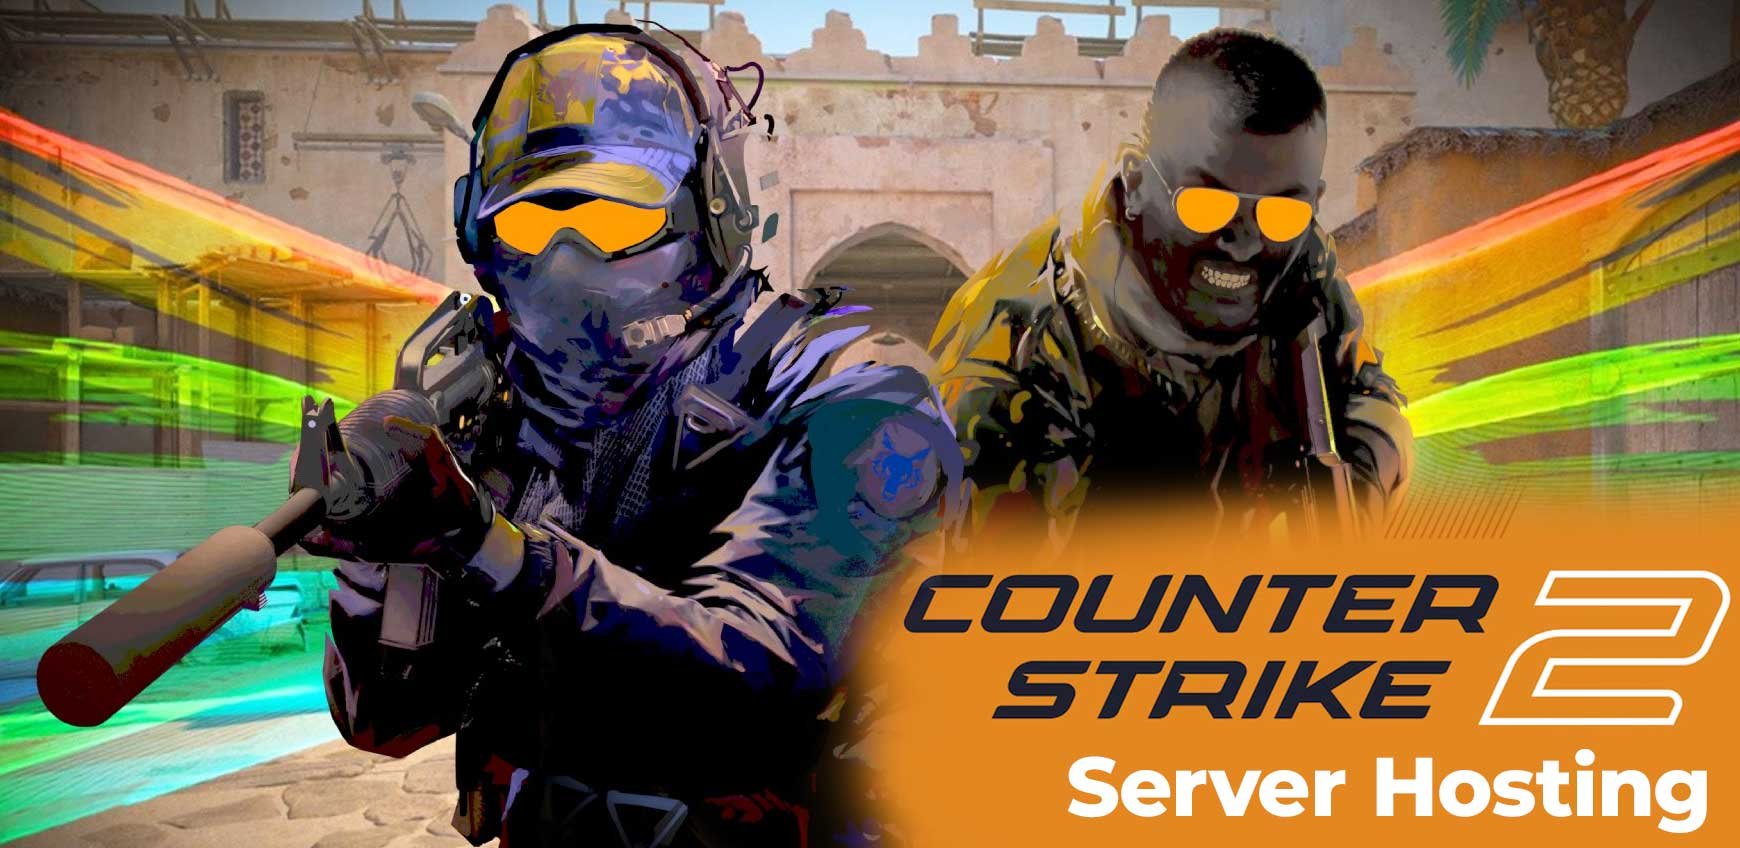 Counter-Strike 2 announced: new sub-tick rate update, all CSGO